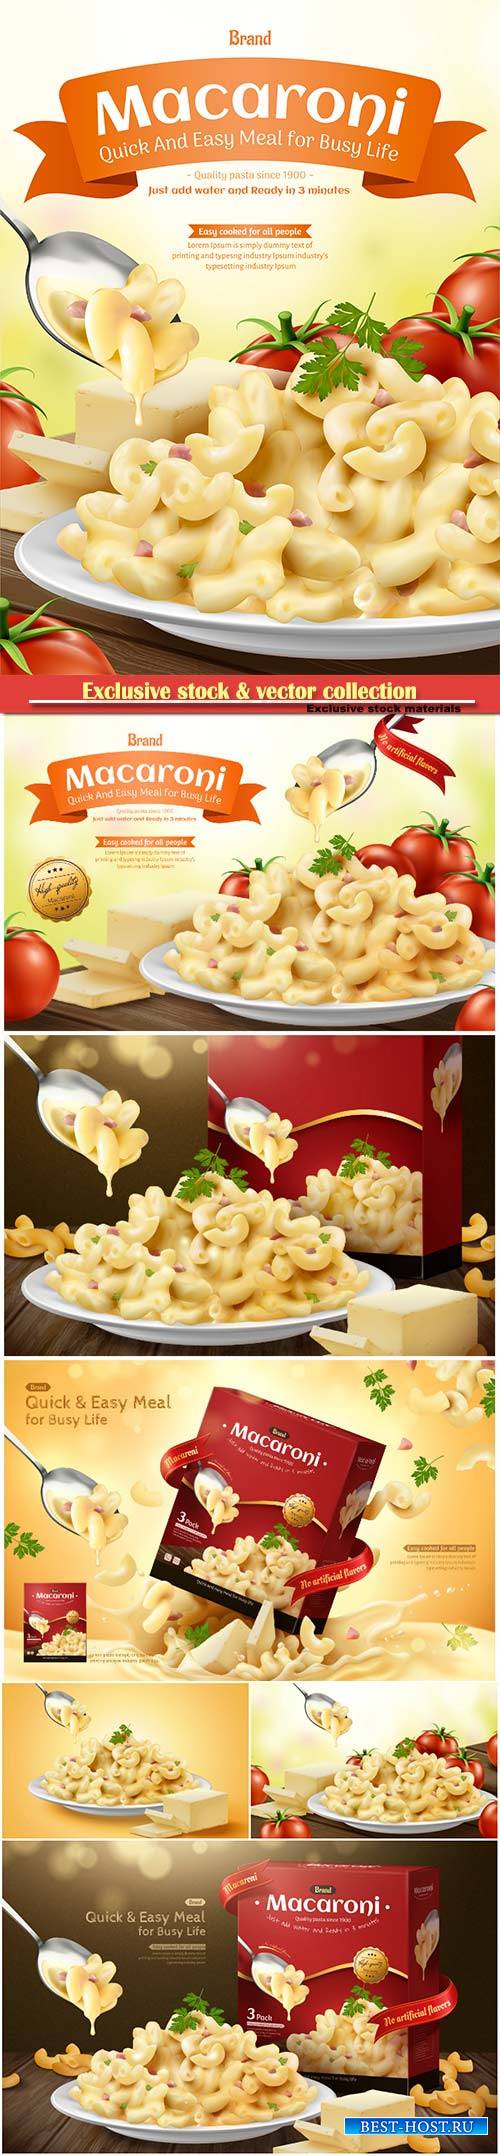 Delicious macaroni ads with cheese sauce and tomatoesin 3d illustration